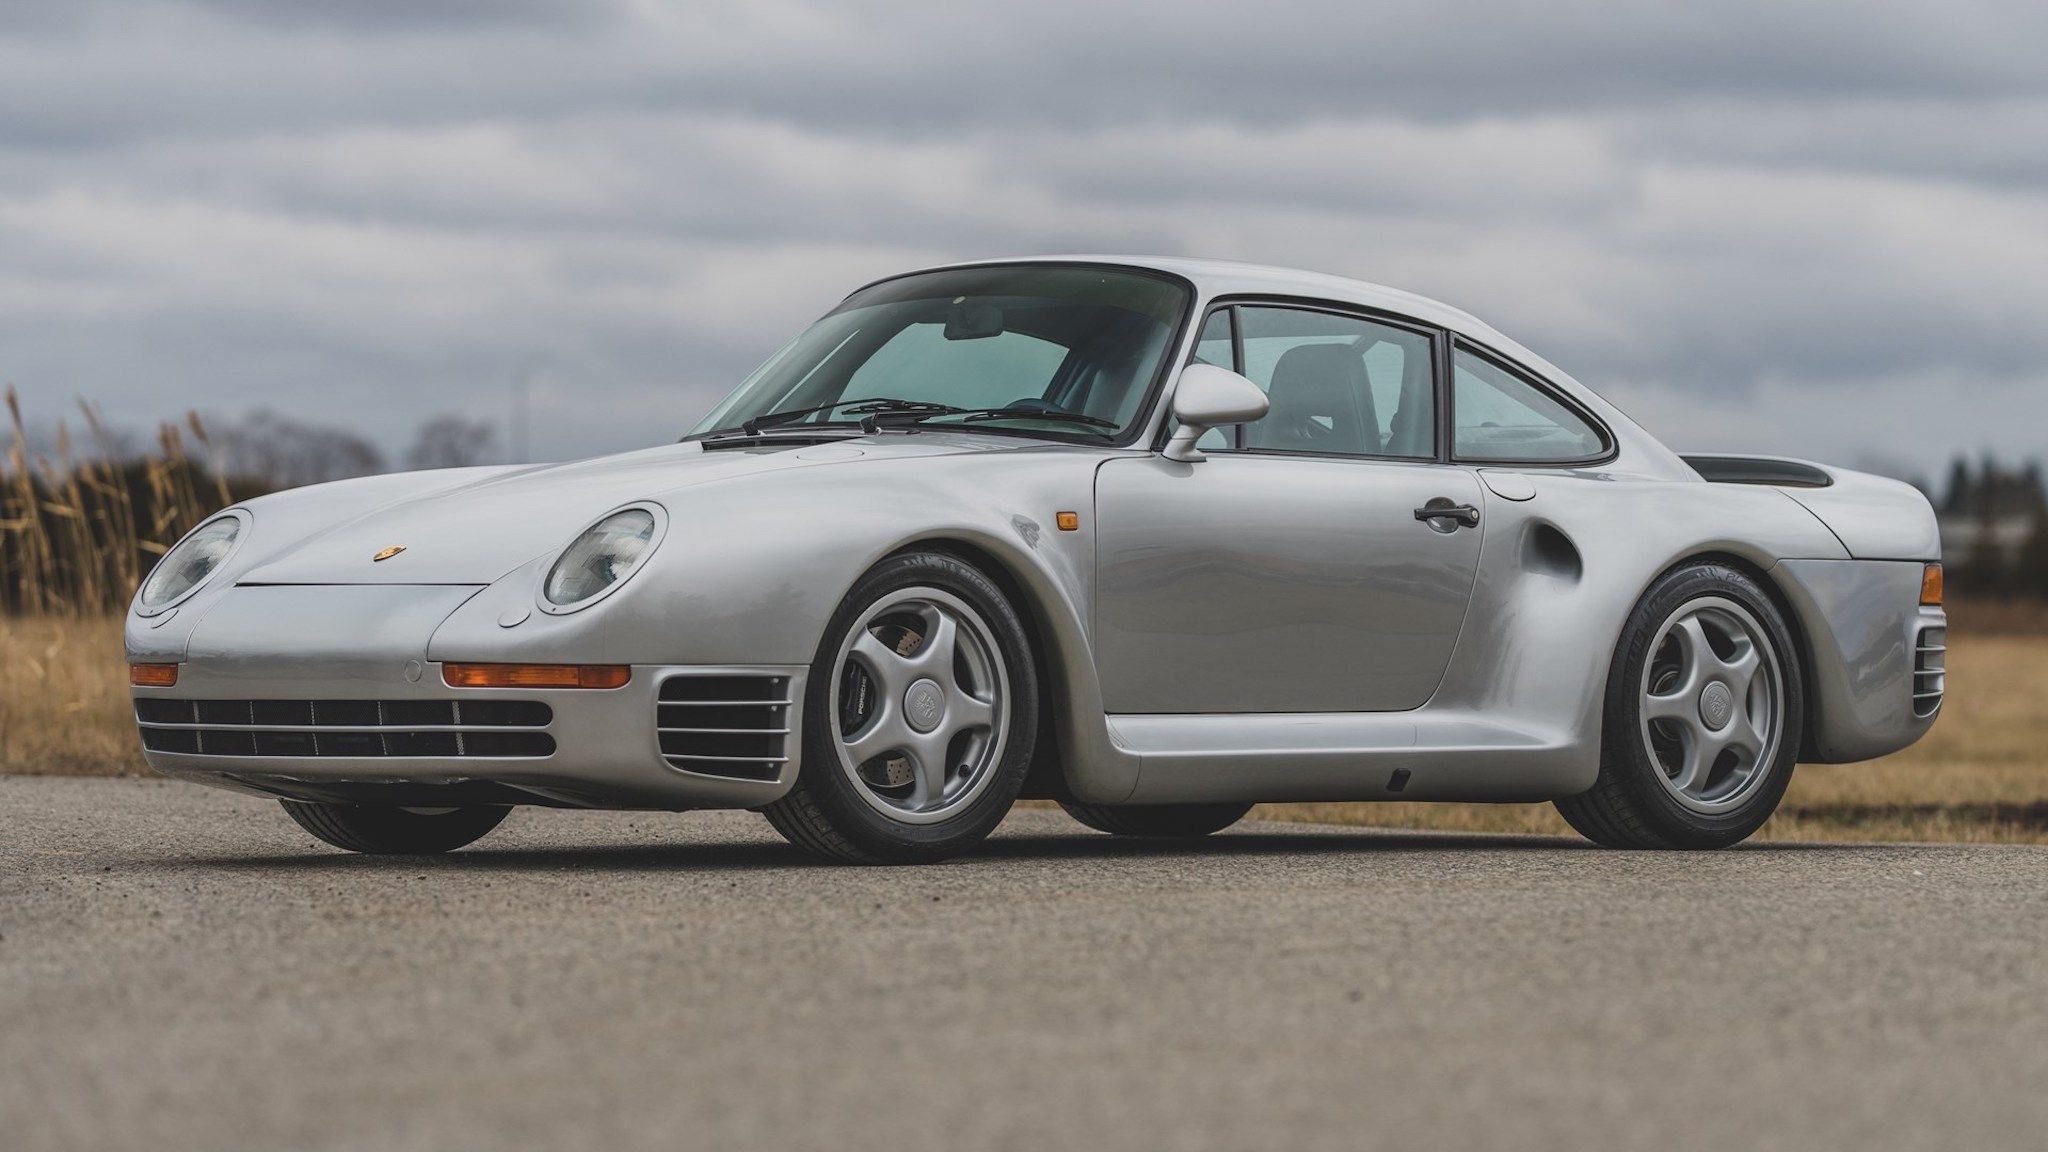 Porsche 959 That's Canepa Tuned And California Legal Heads To Amelia Island Auction